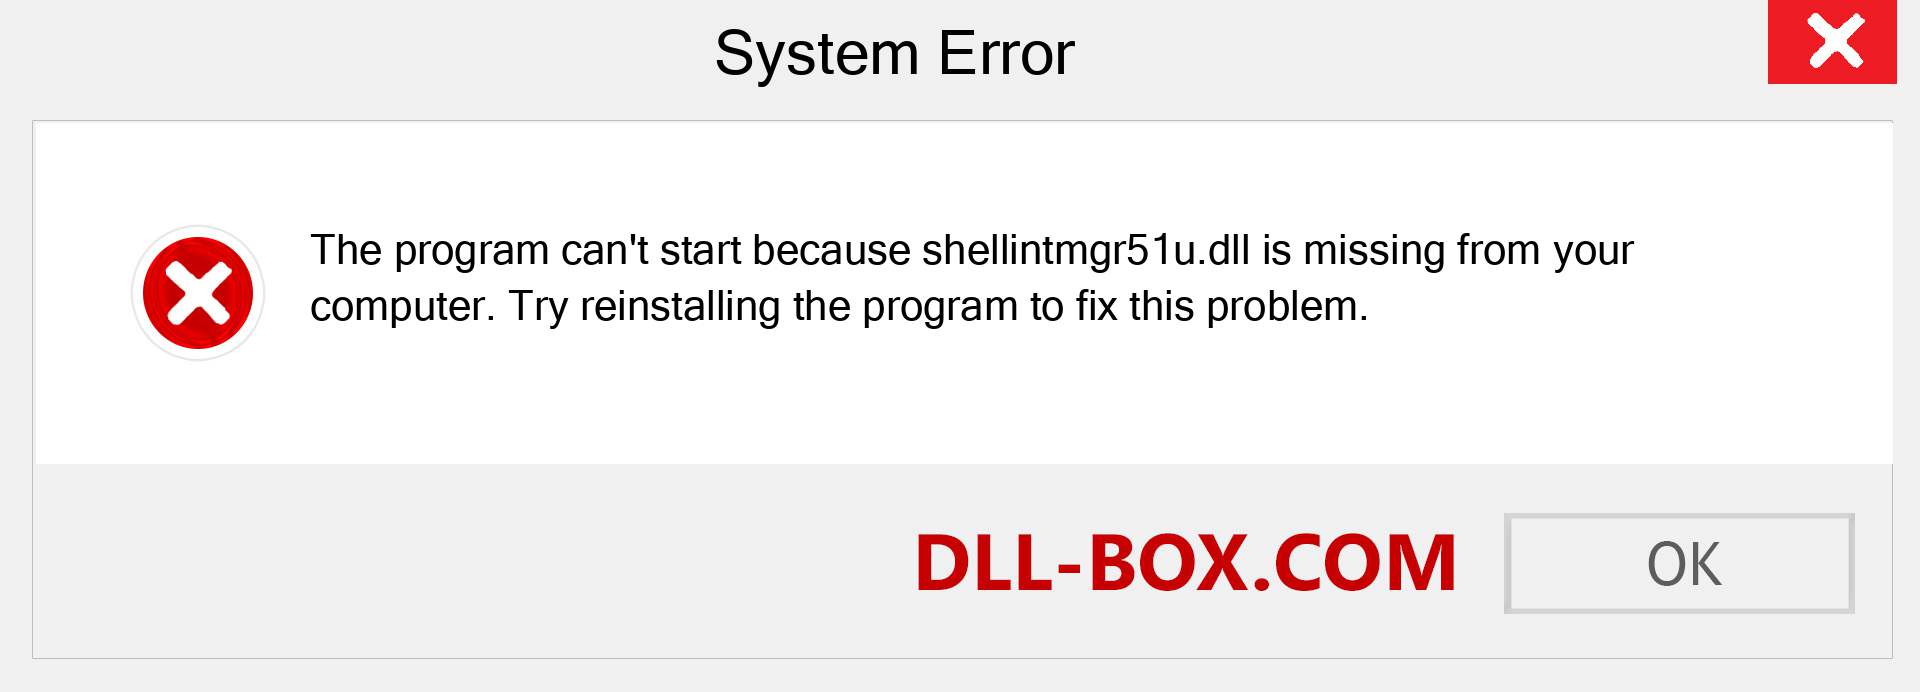  shellintmgr51u.dll file is missing?. Download for Windows 7, 8, 10 - Fix  shellintmgr51u dll Missing Error on Windows, photos, images